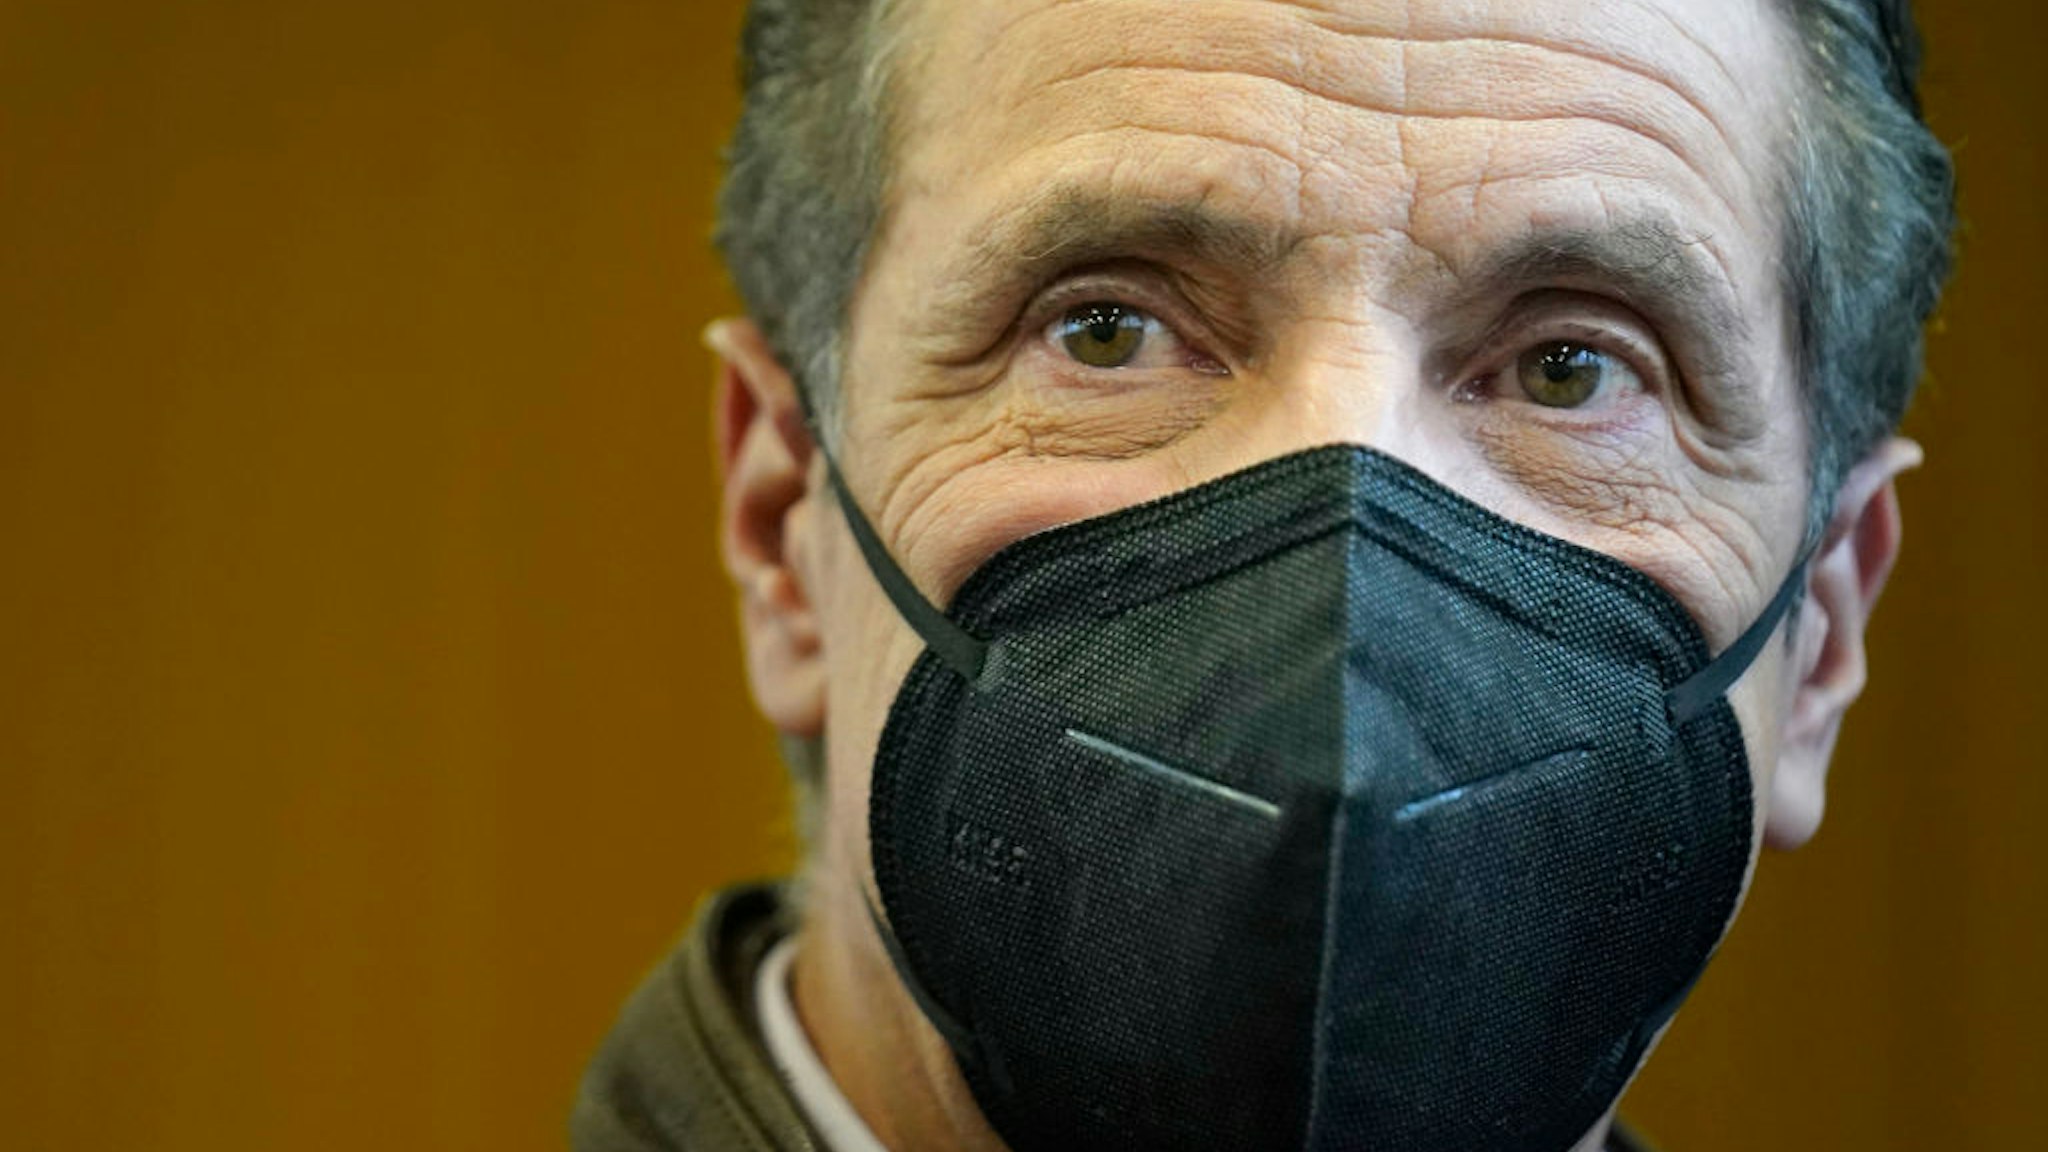 New York Governor Andrew Cuomo walks through a vaccination site after speaking in the Brooklyn borough of New York, on February 22, 2021.